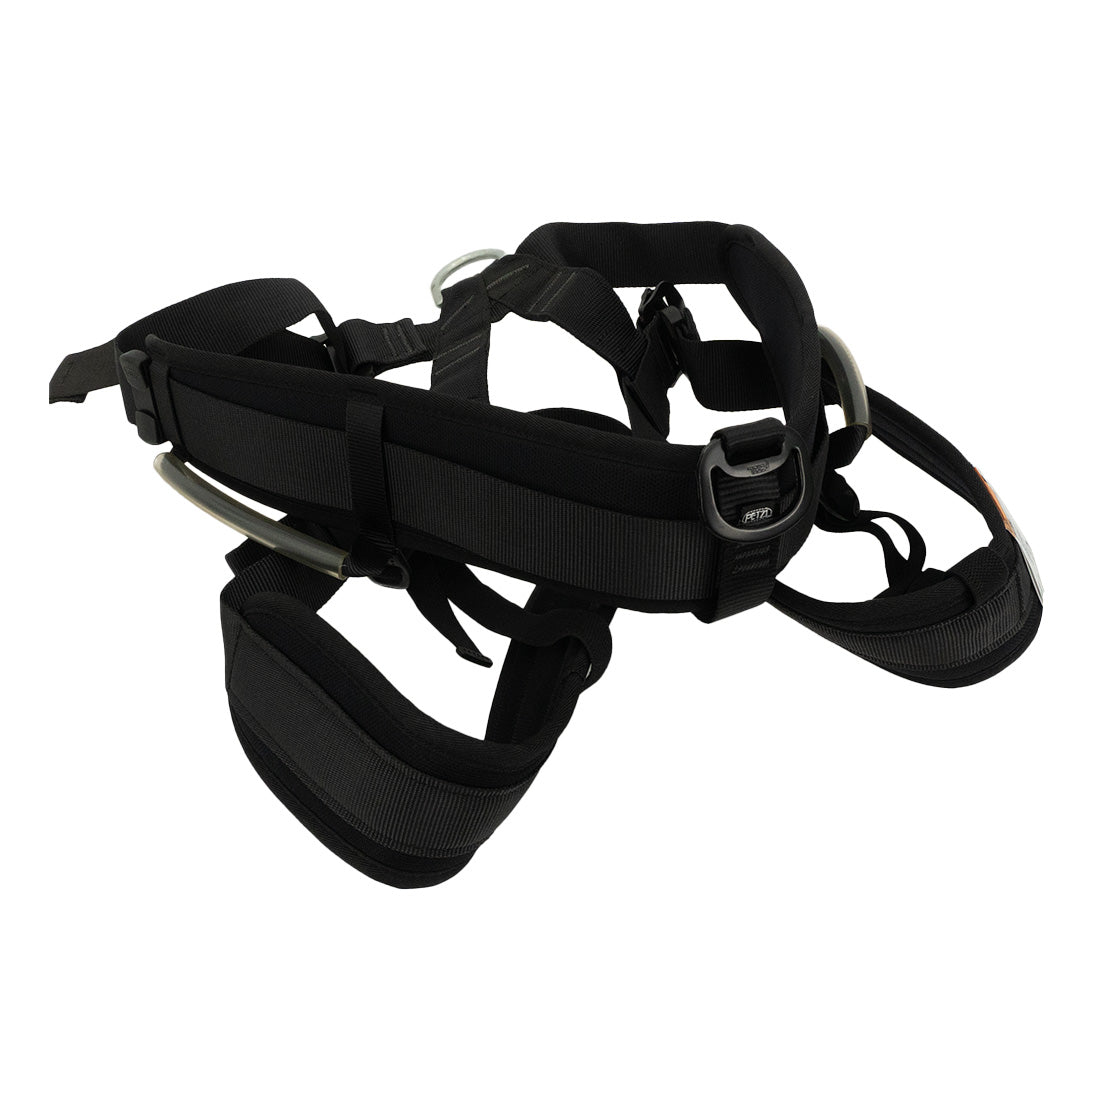 Petzl FALCON Seat Harness Size 2 Top View